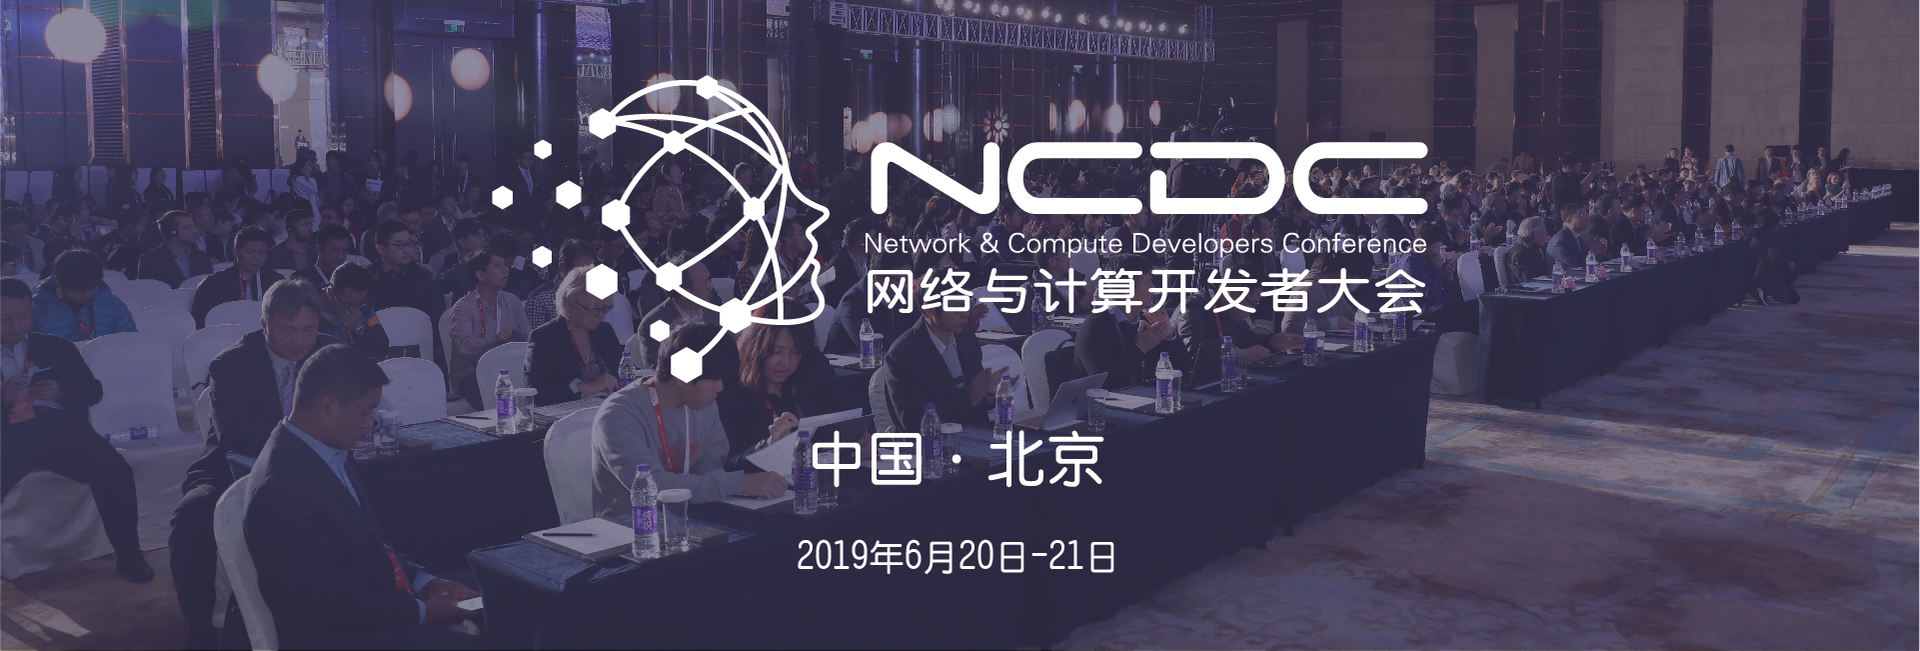 Network & Compute Developers Conference